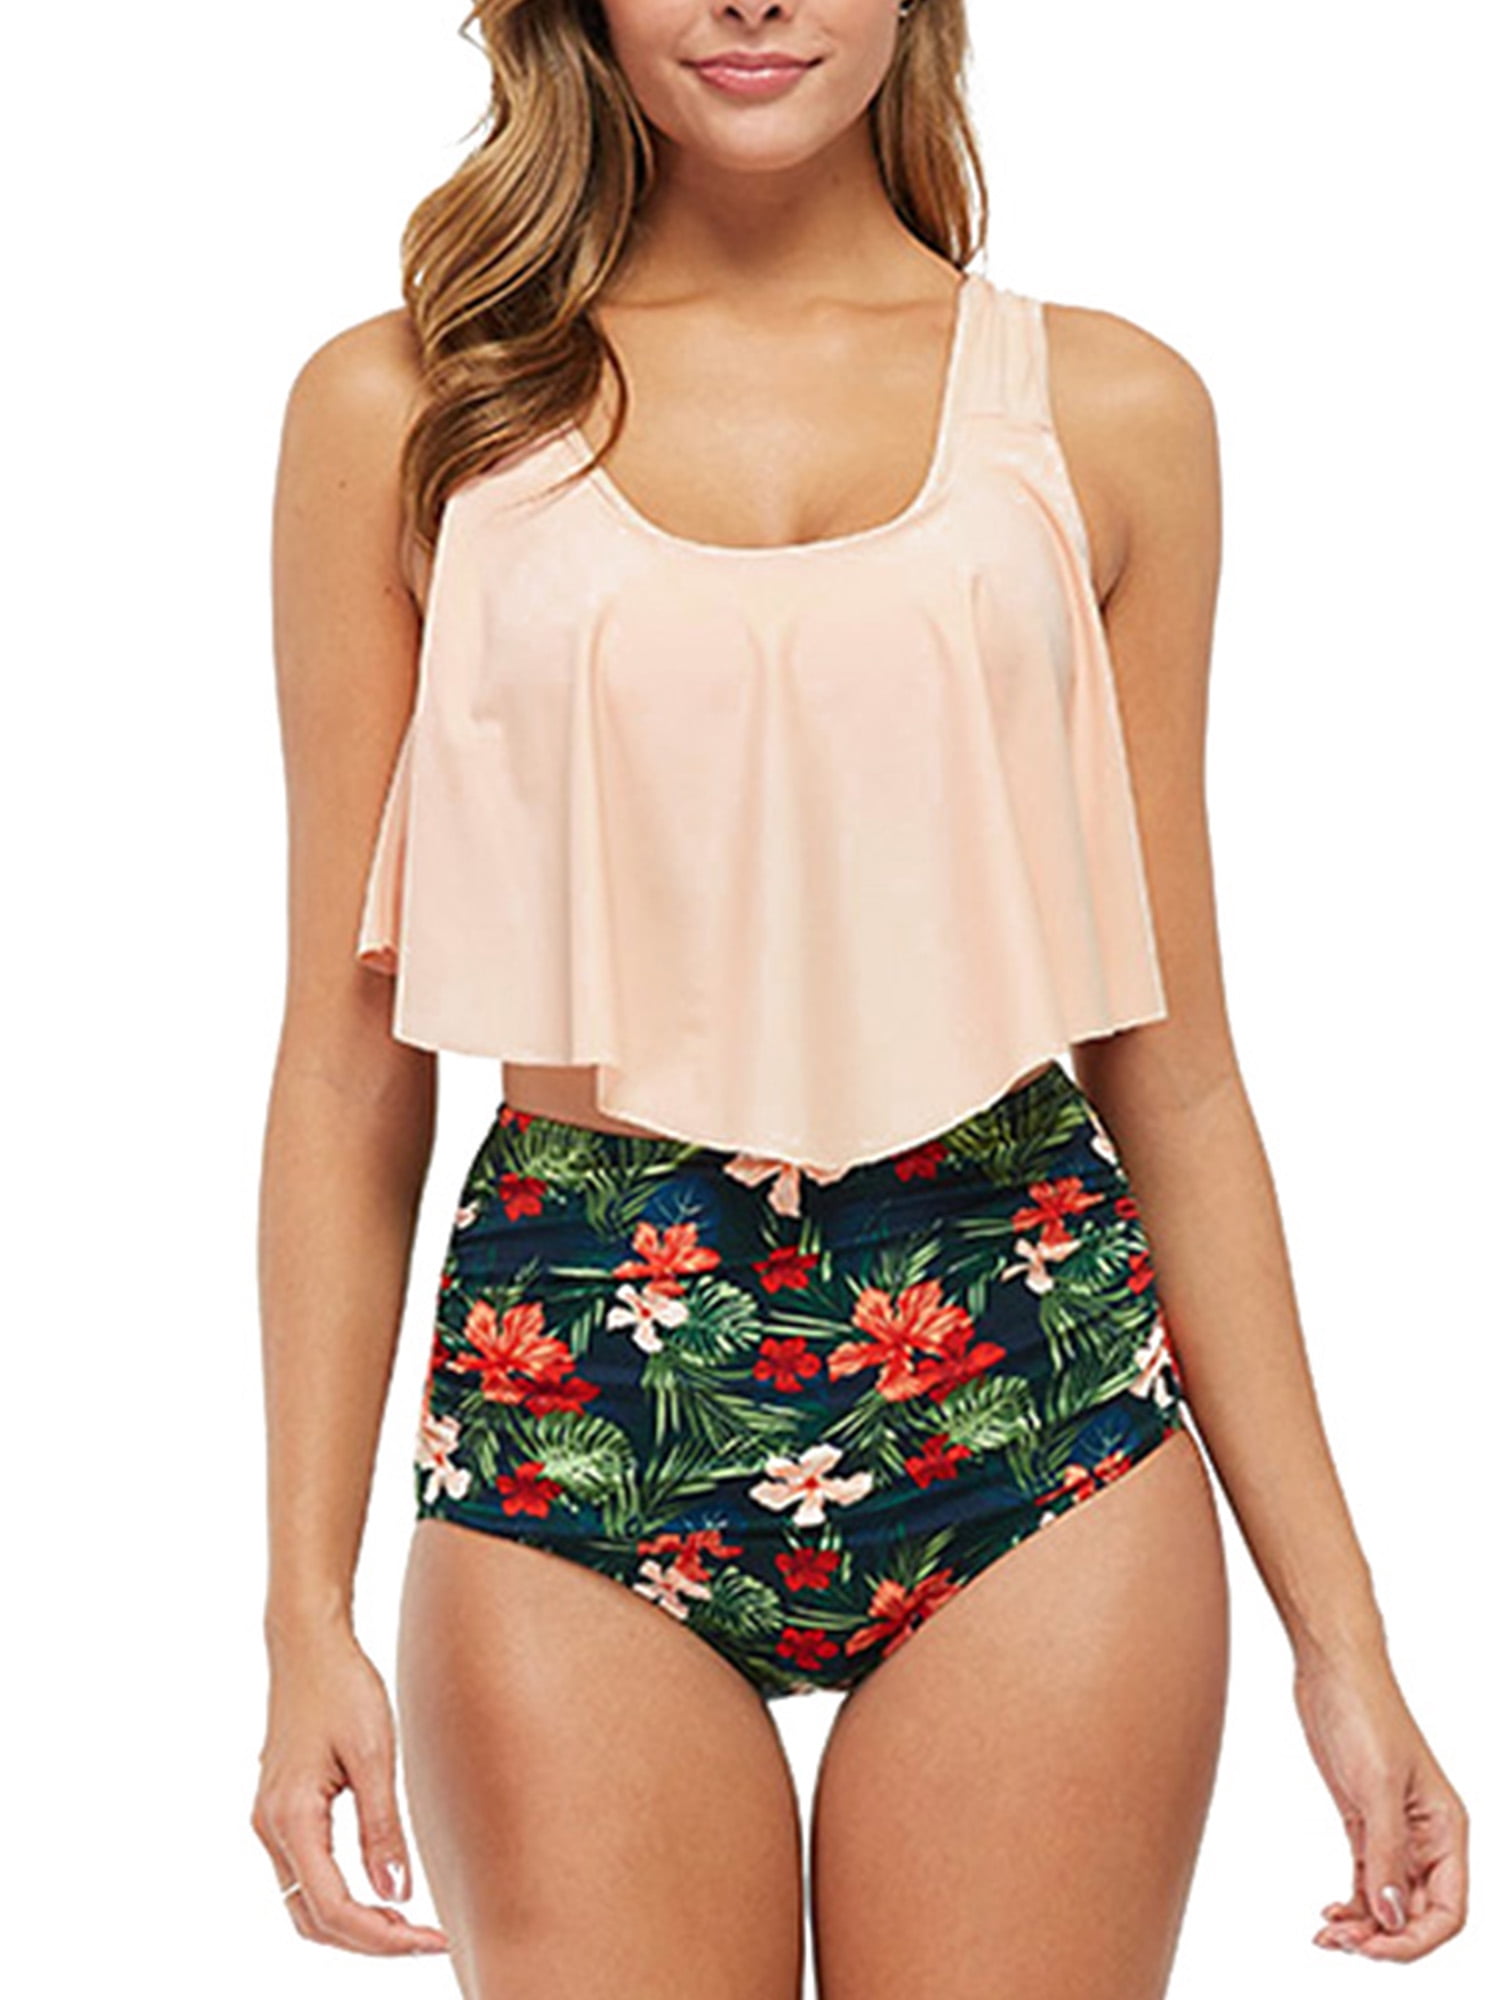 Sexy Dance Swimsuit for Women Two Halter Bathing Suits Top Ruffled Top with High Waisted Bottom Tankini Set S-XXL Tummy Control - Walmart.com